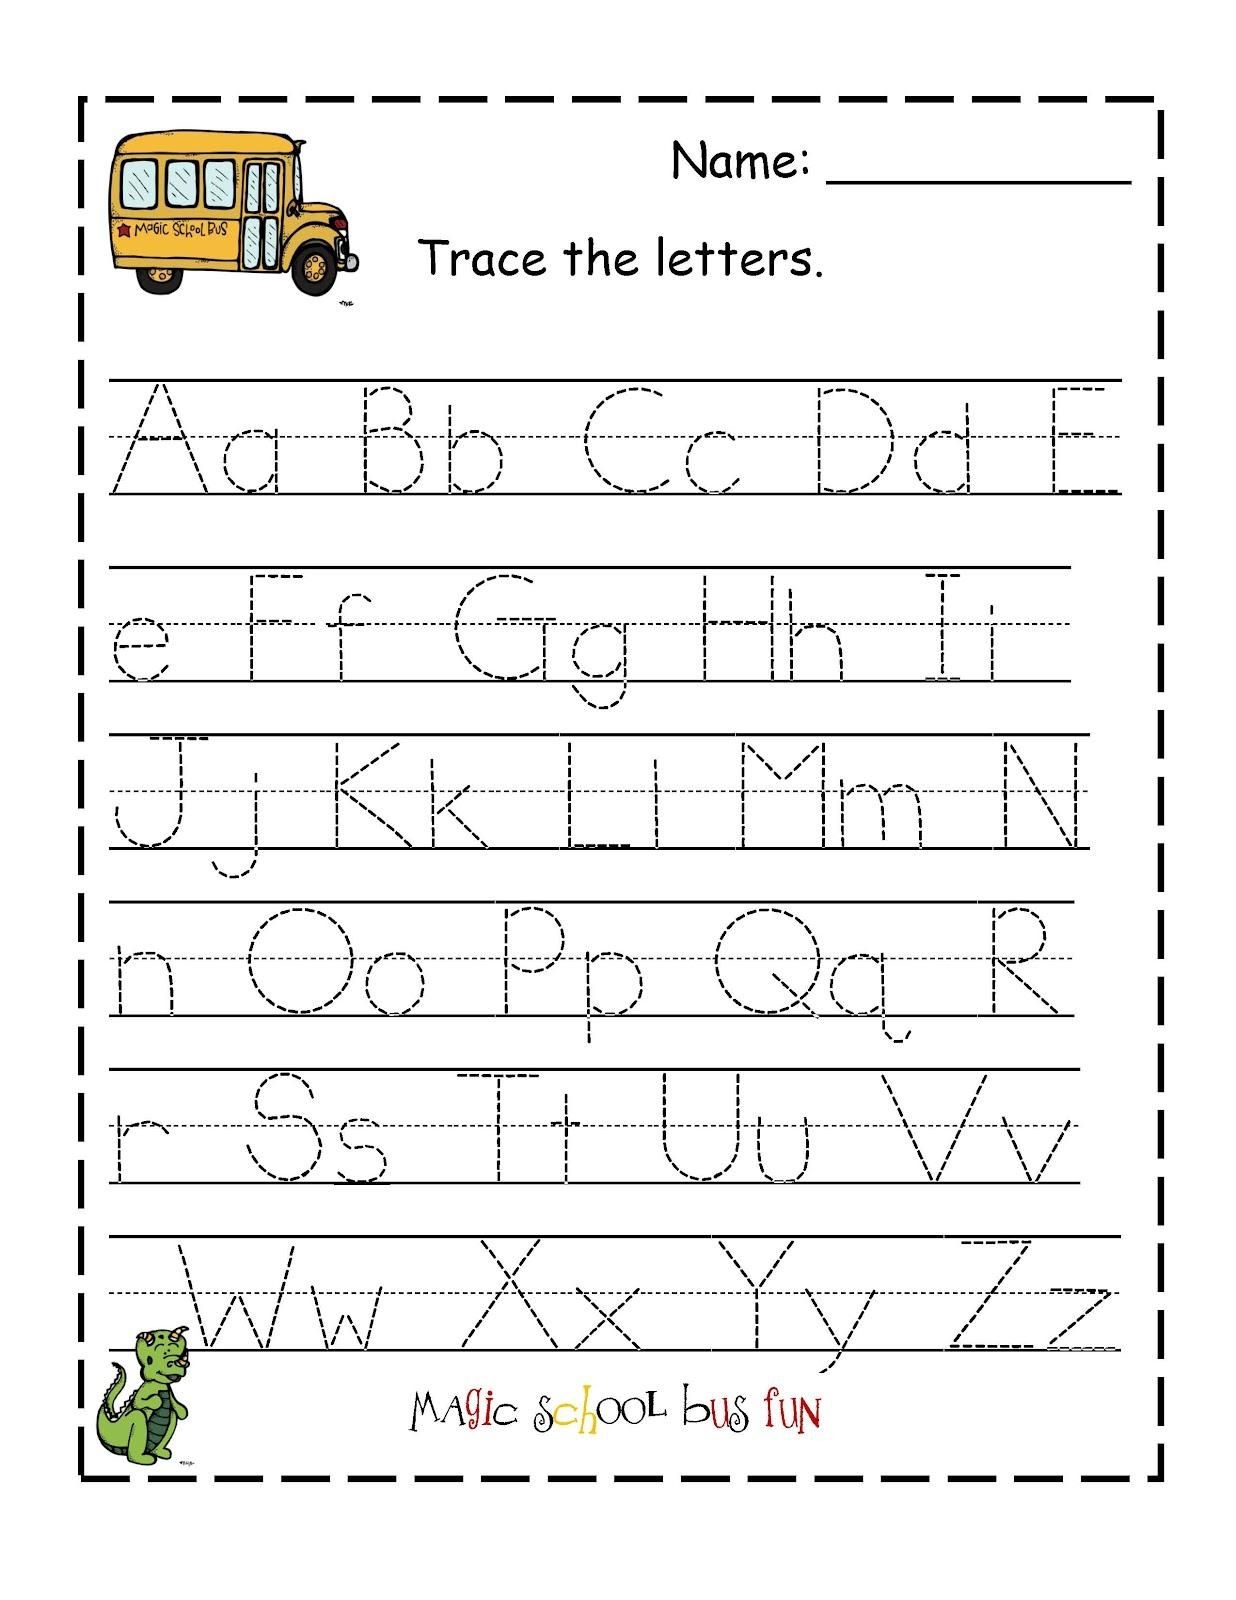 Free Printable Abc Tracing Worksheets #2 | Places To Visit - Free Printable Tracing Alphabet Worksheets